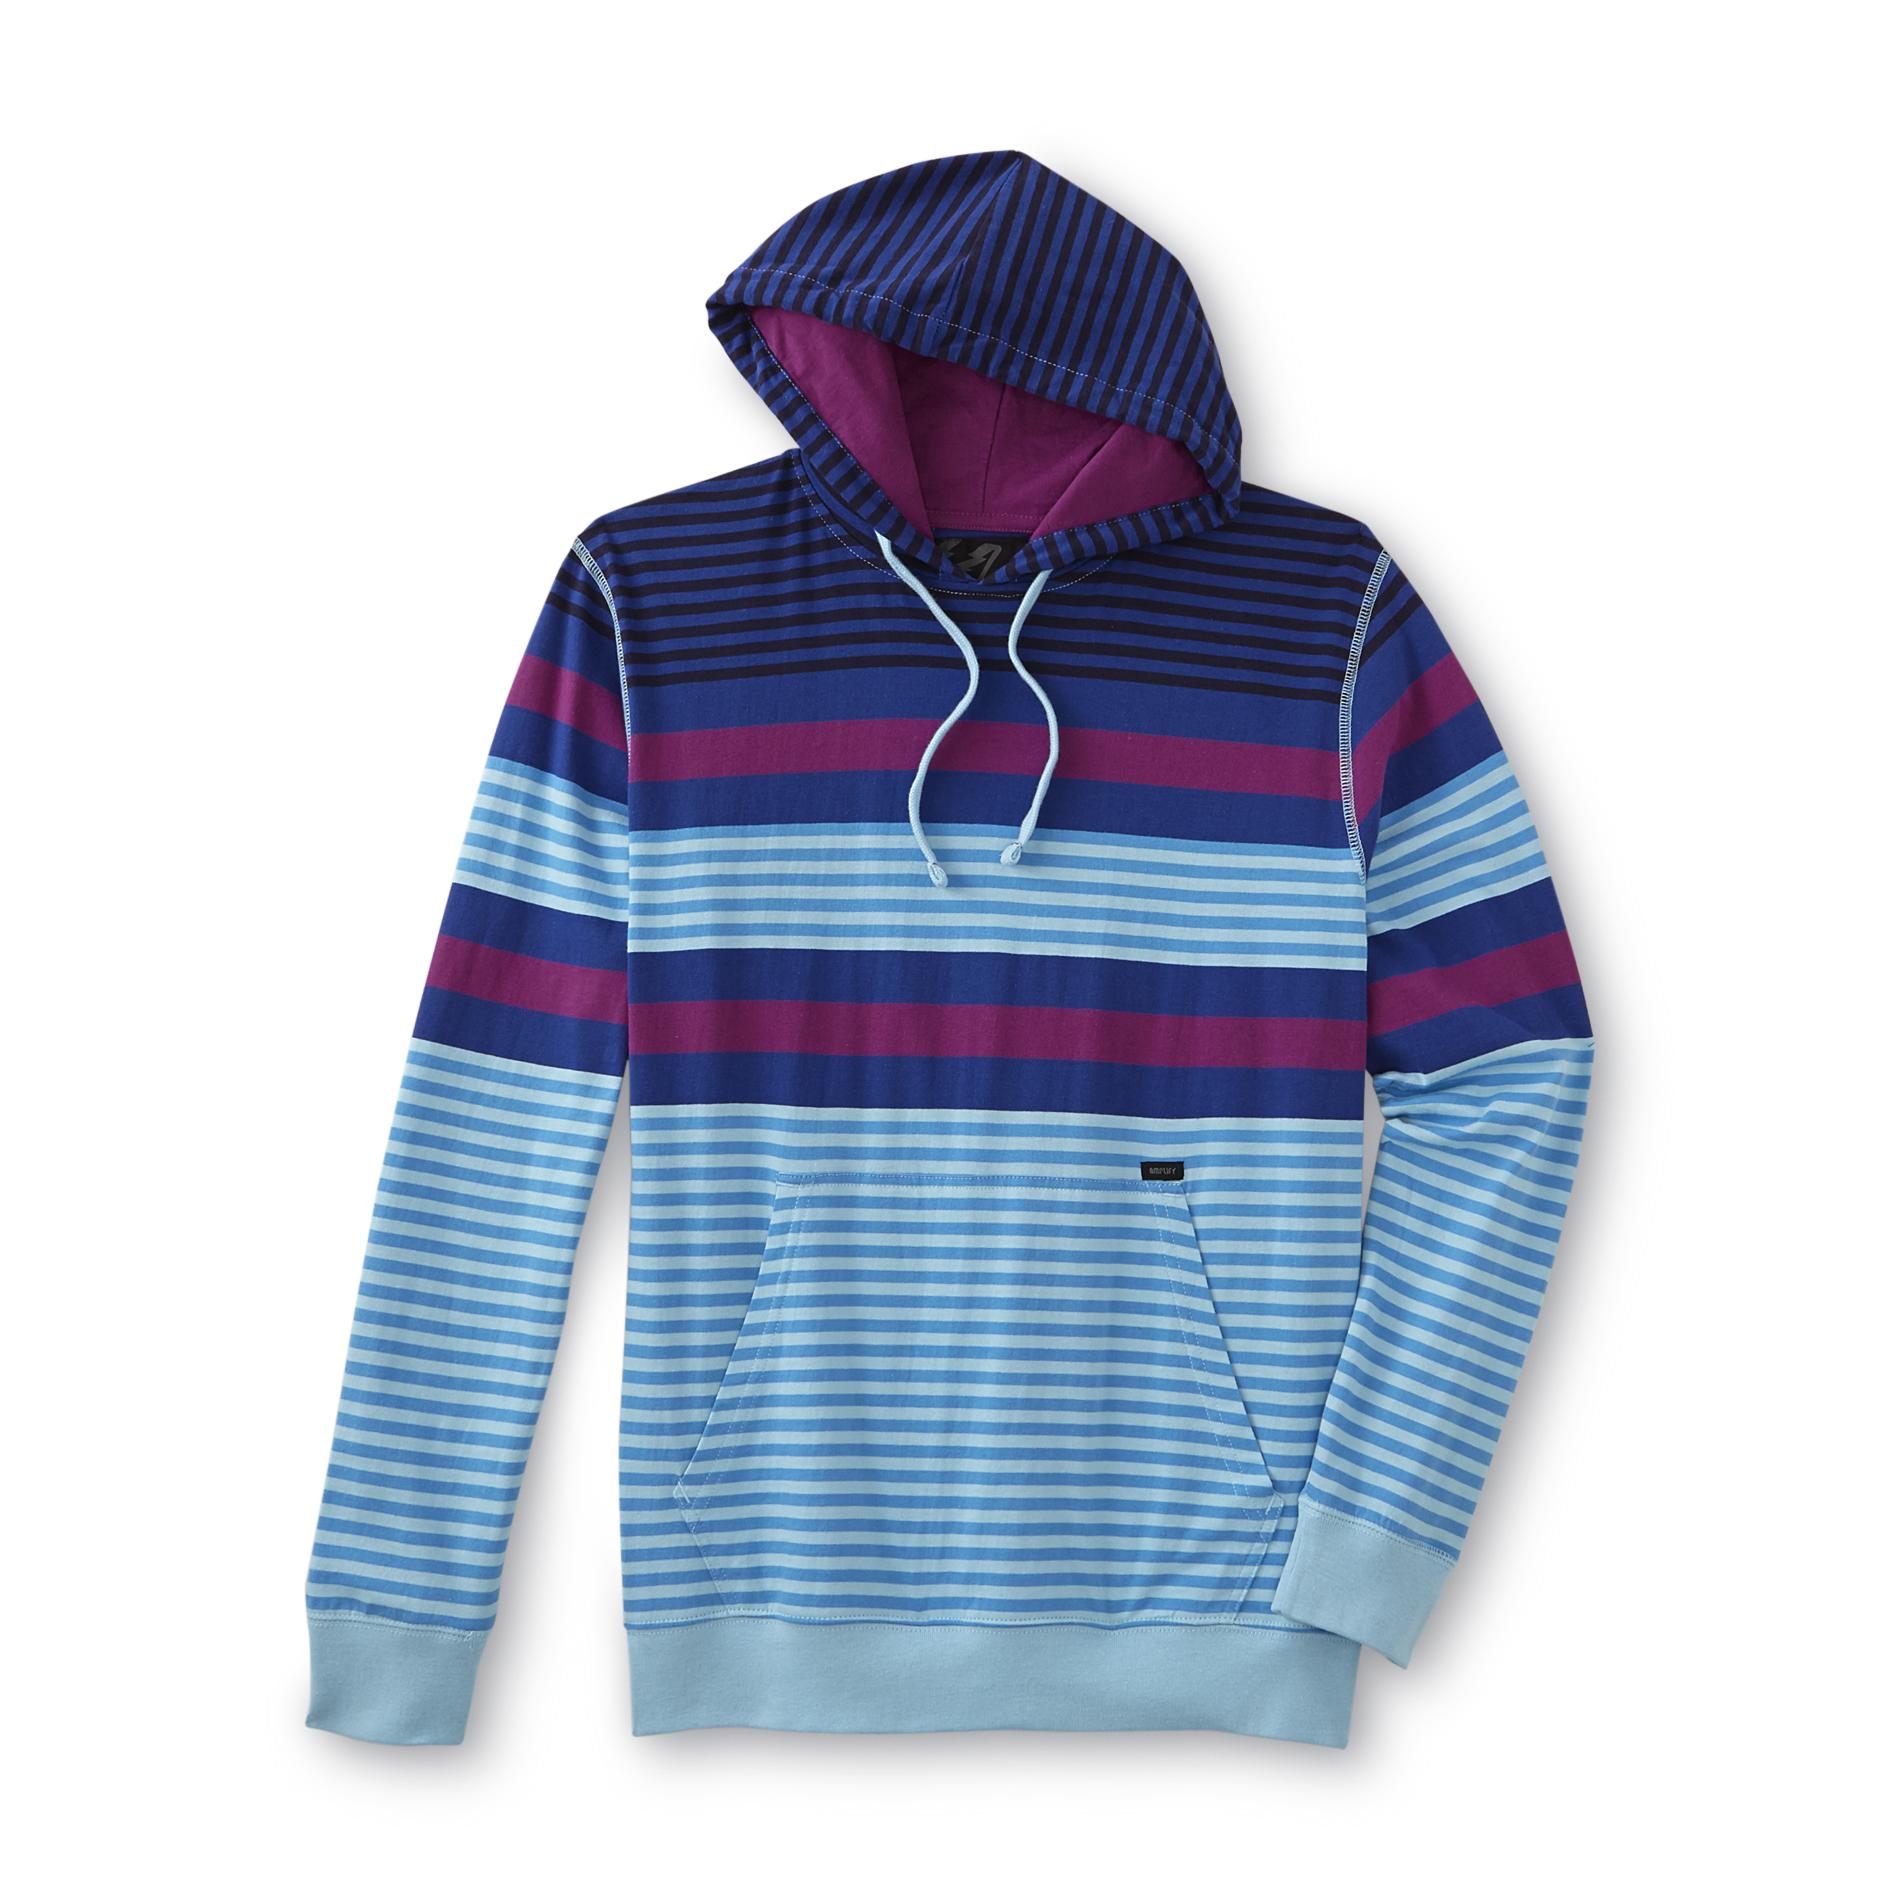 Young Men's Hoodie - Striped